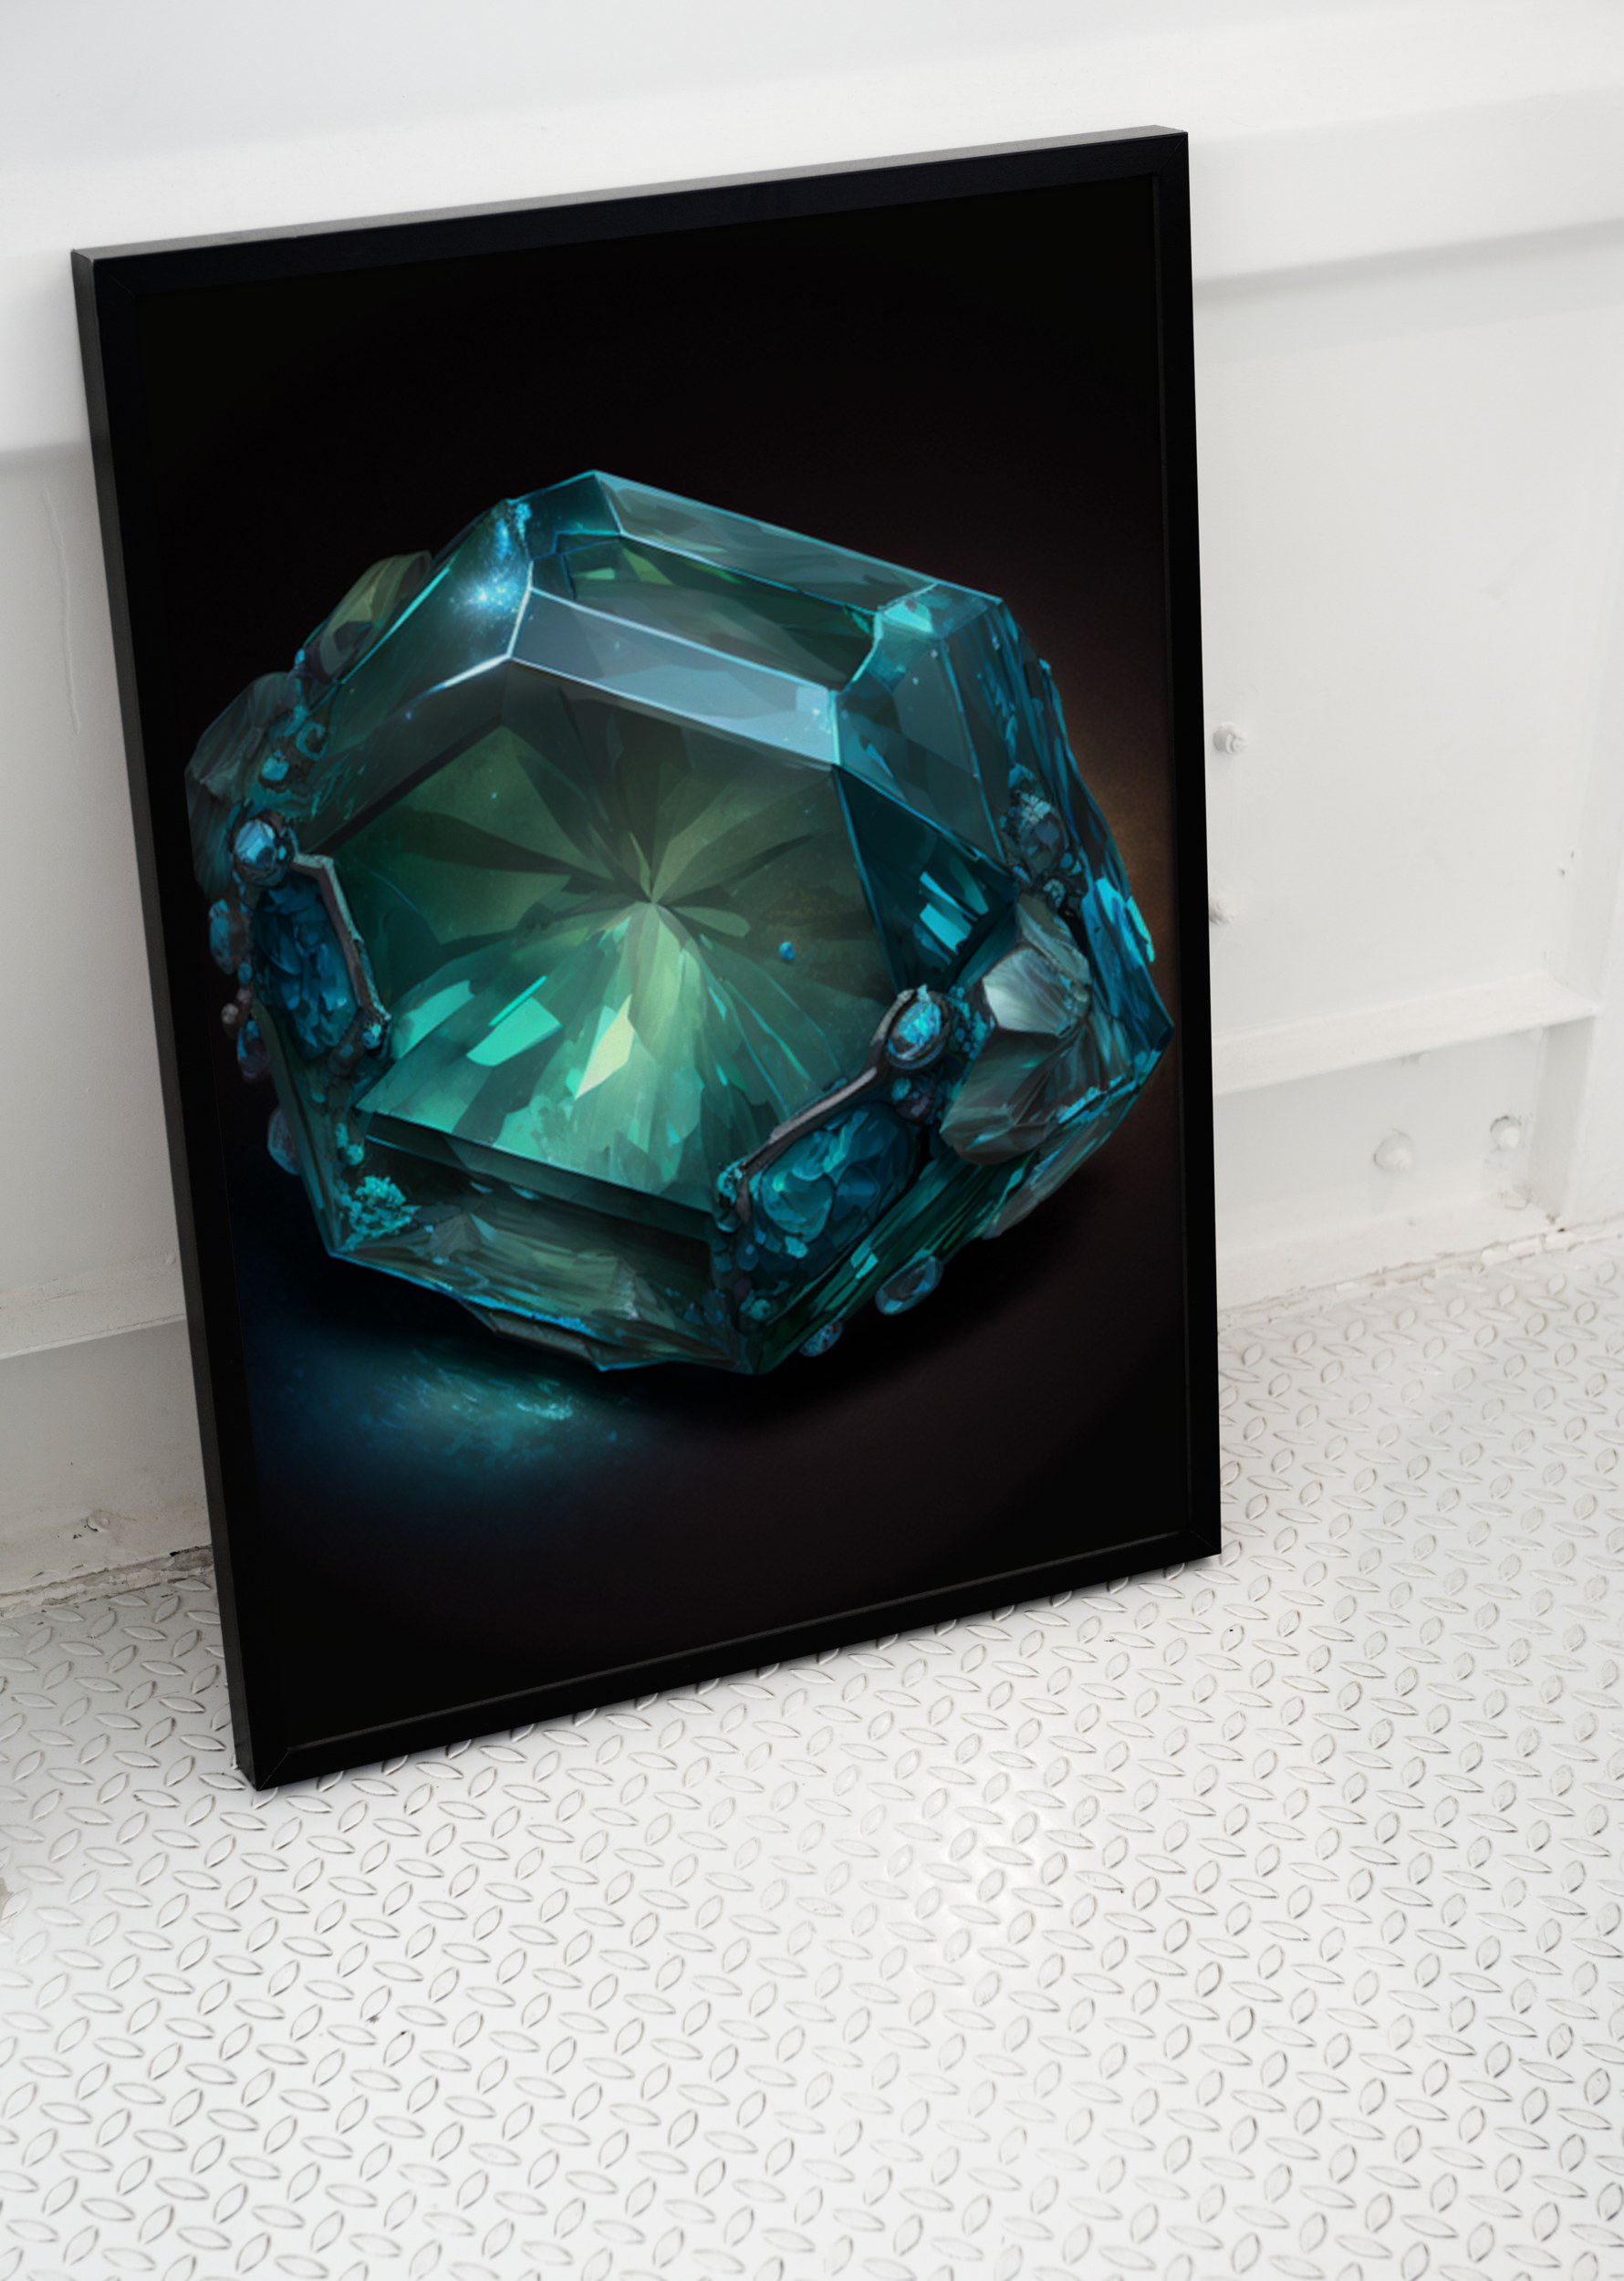 Picture of a green diamond on a black background.